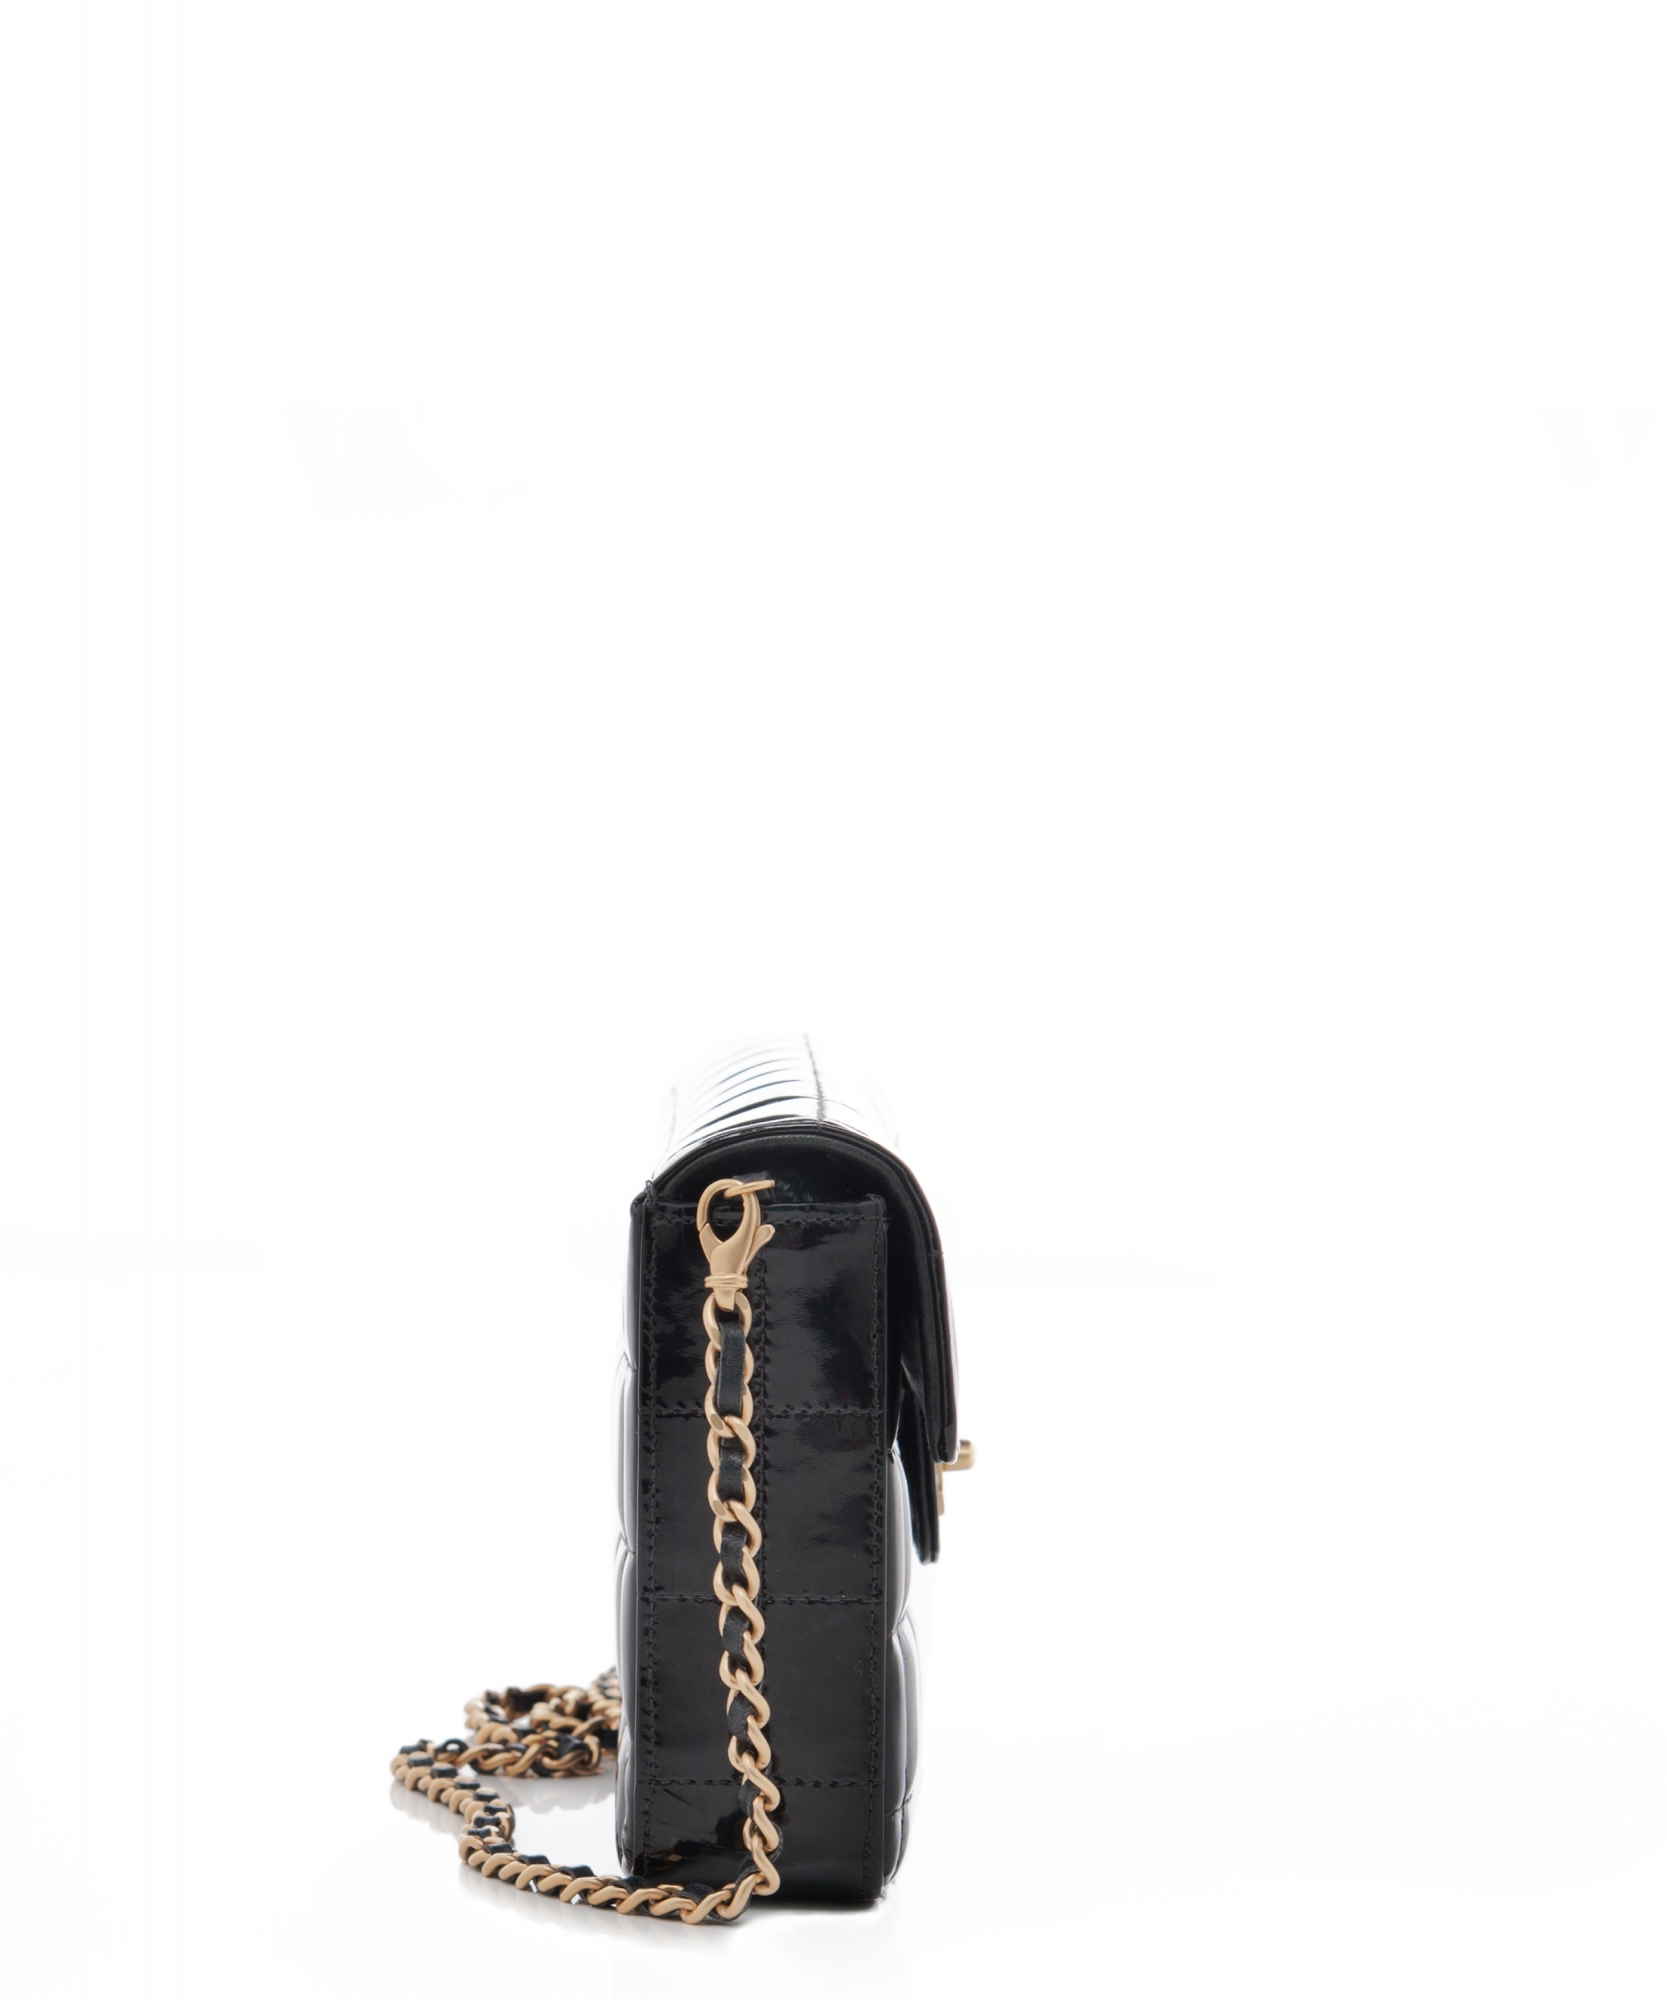 Chanel 'East West' Flap Bag in Black Quilted Patent Leather